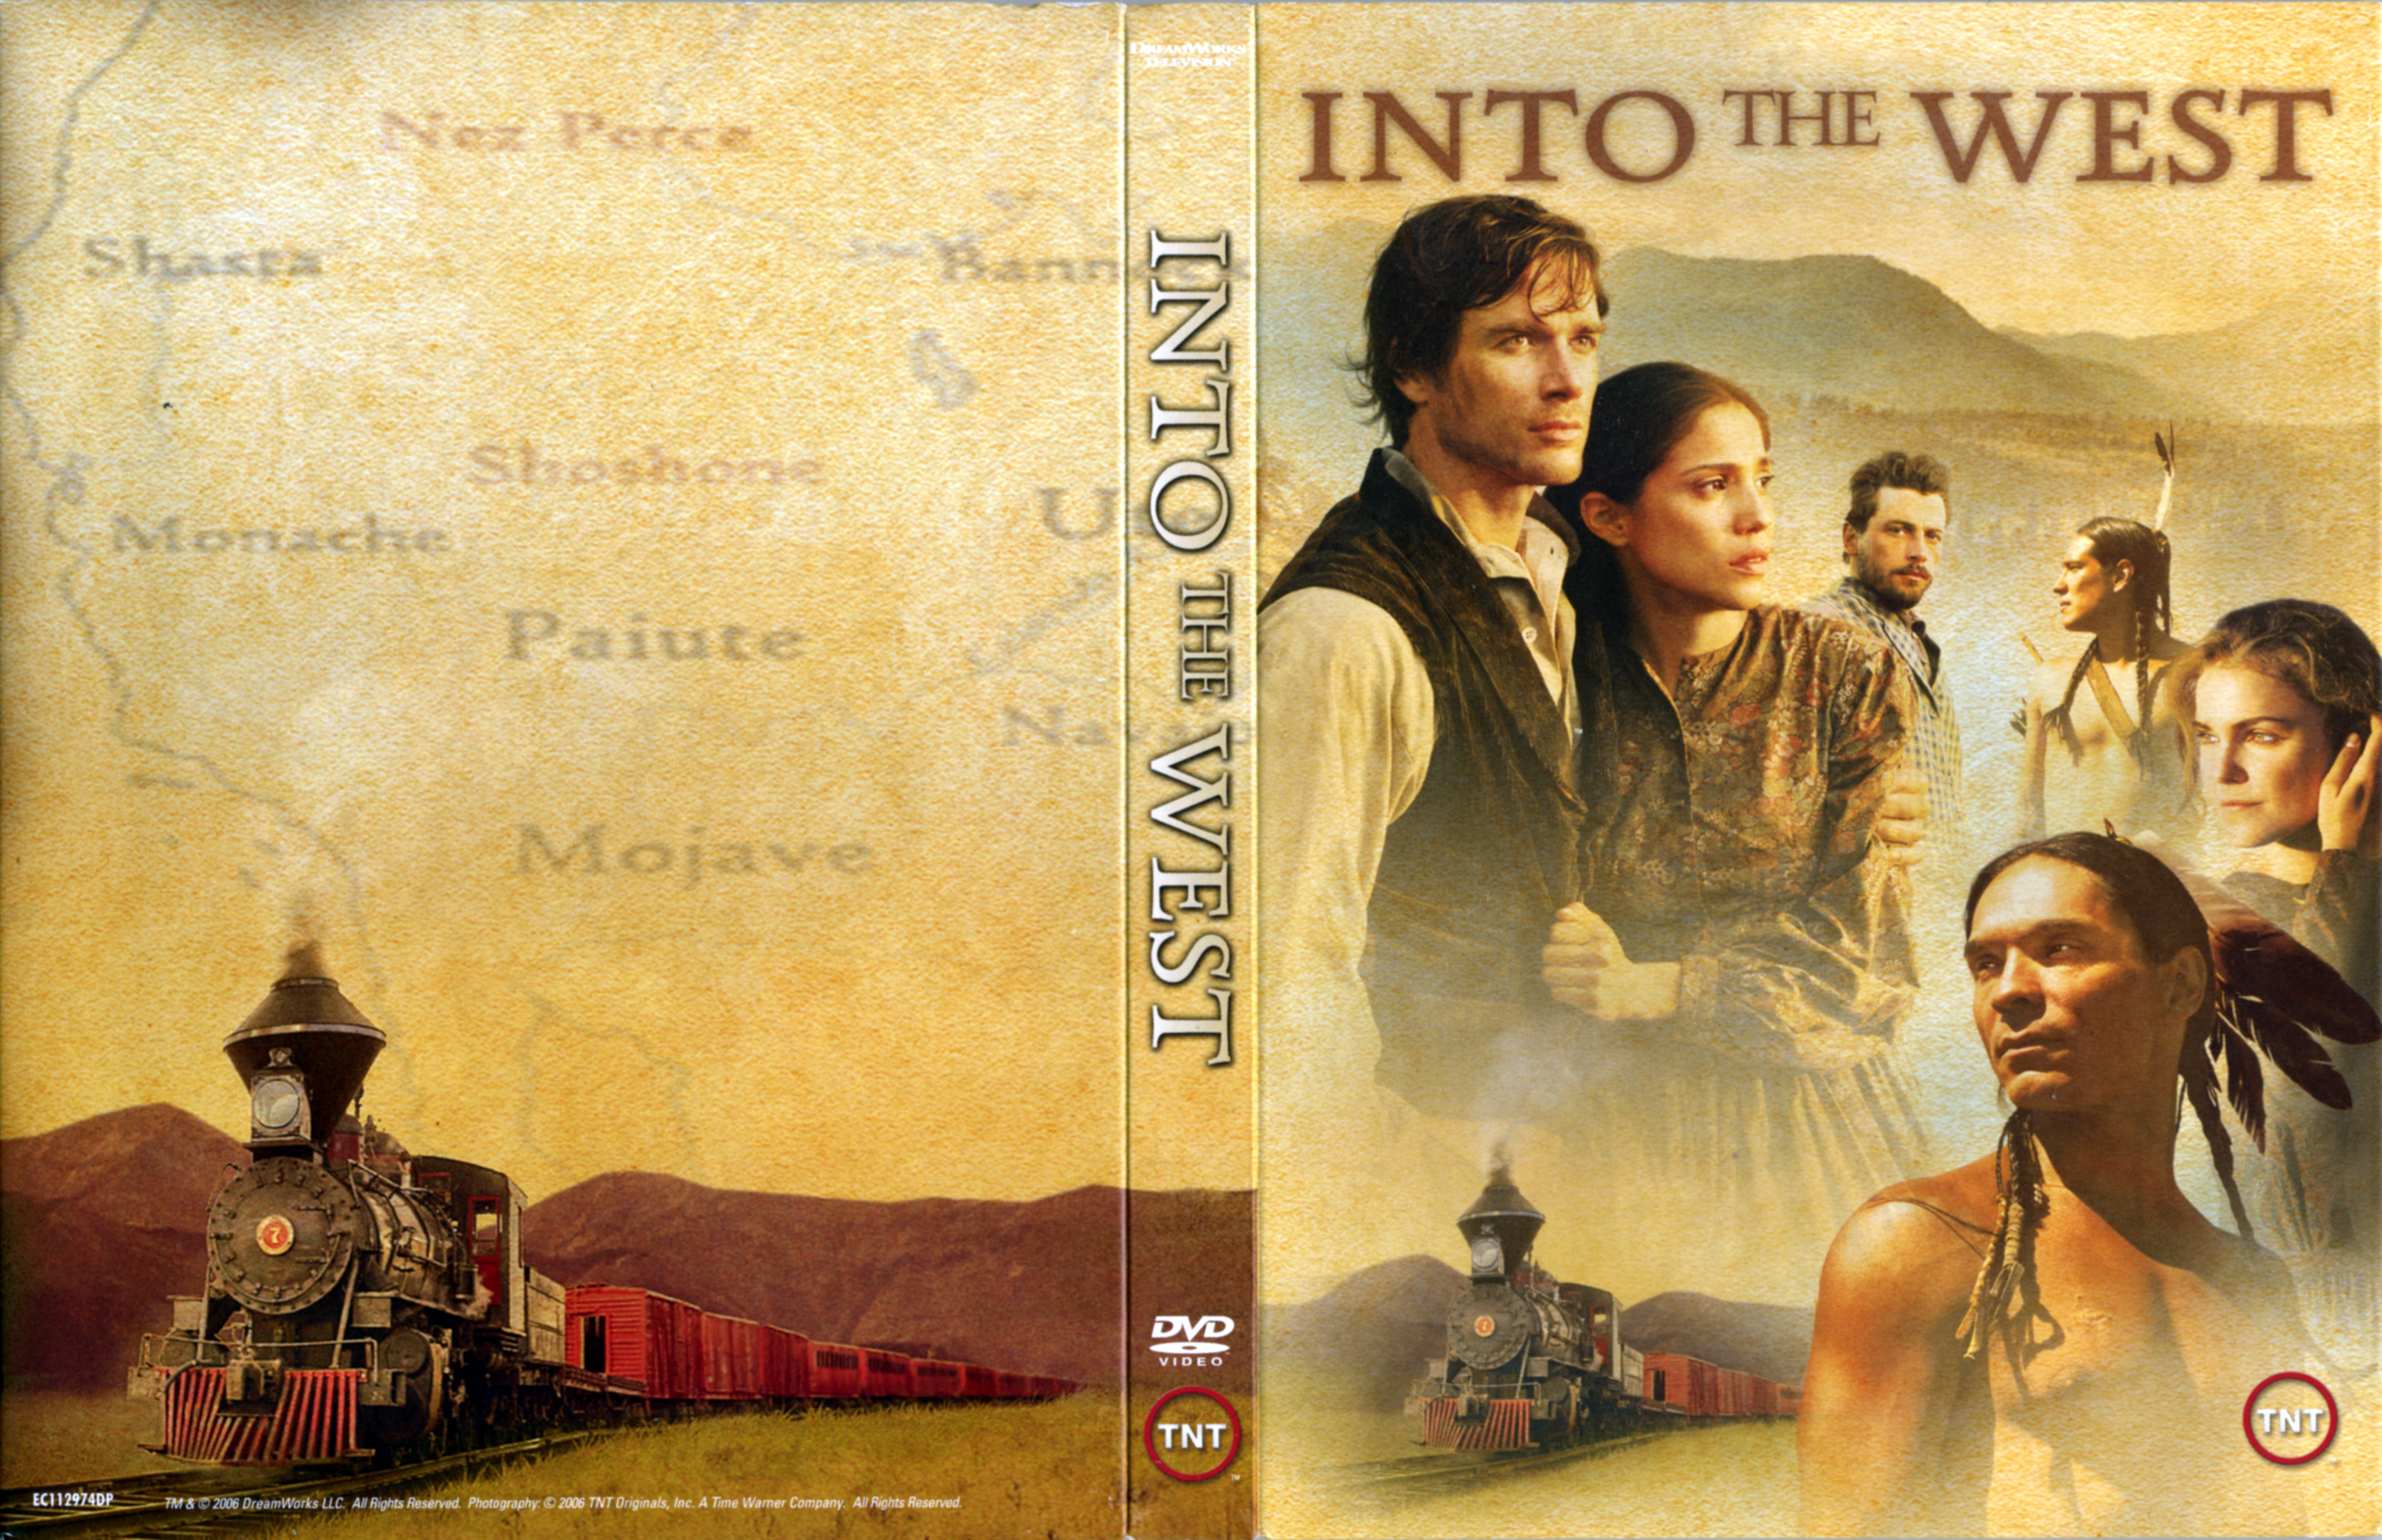 Jaquette DVD Into the west